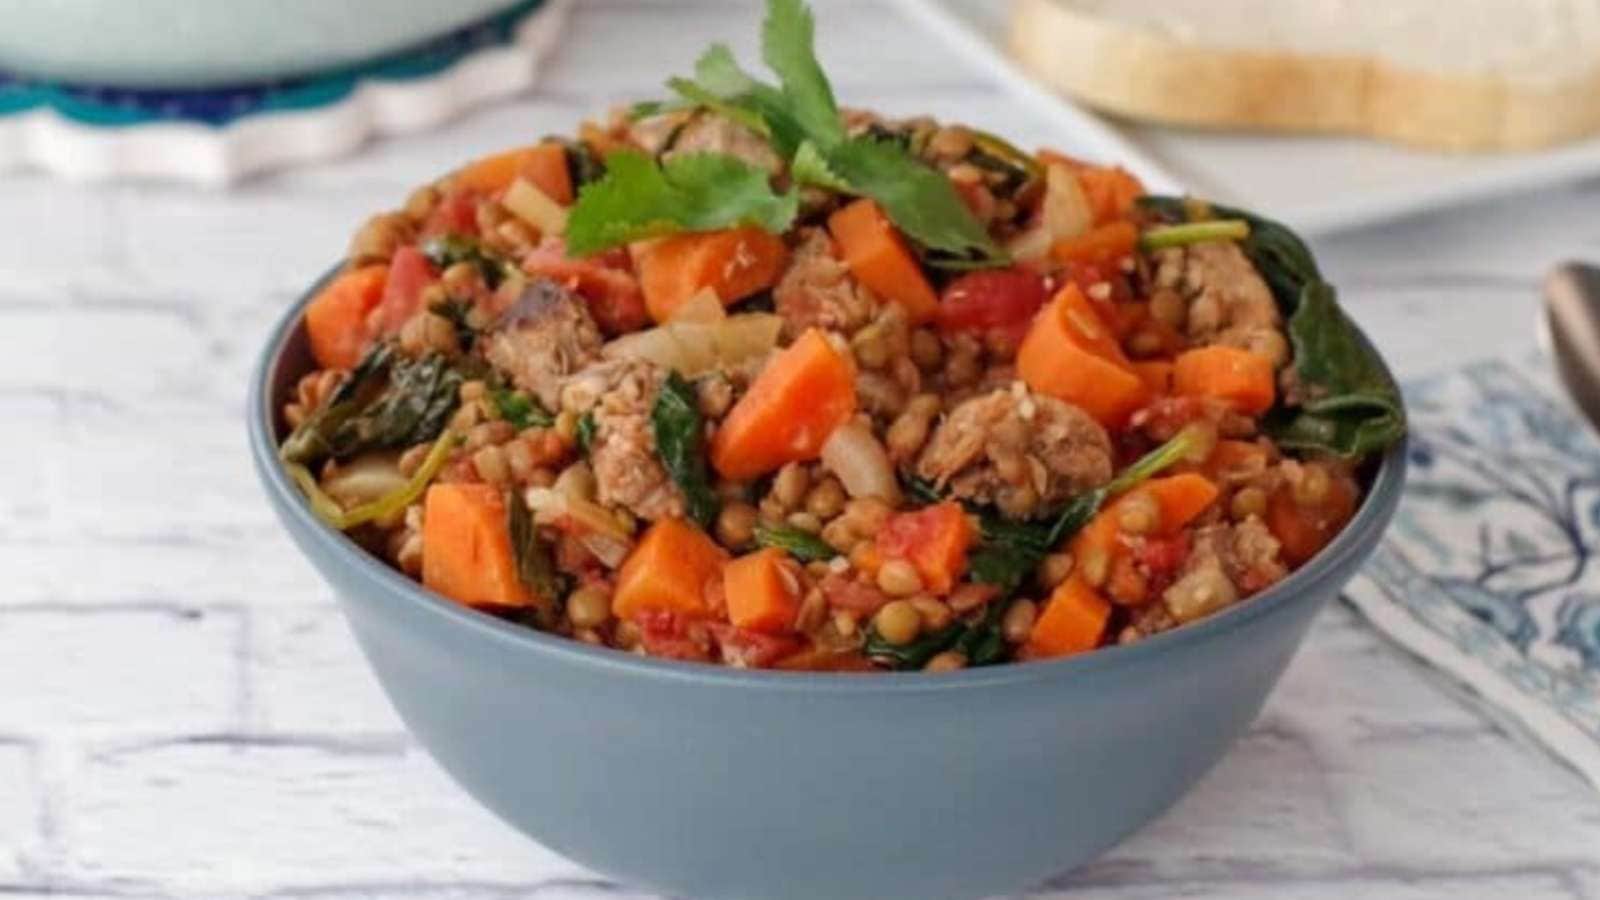 A bowl of lentil and sausage stew.